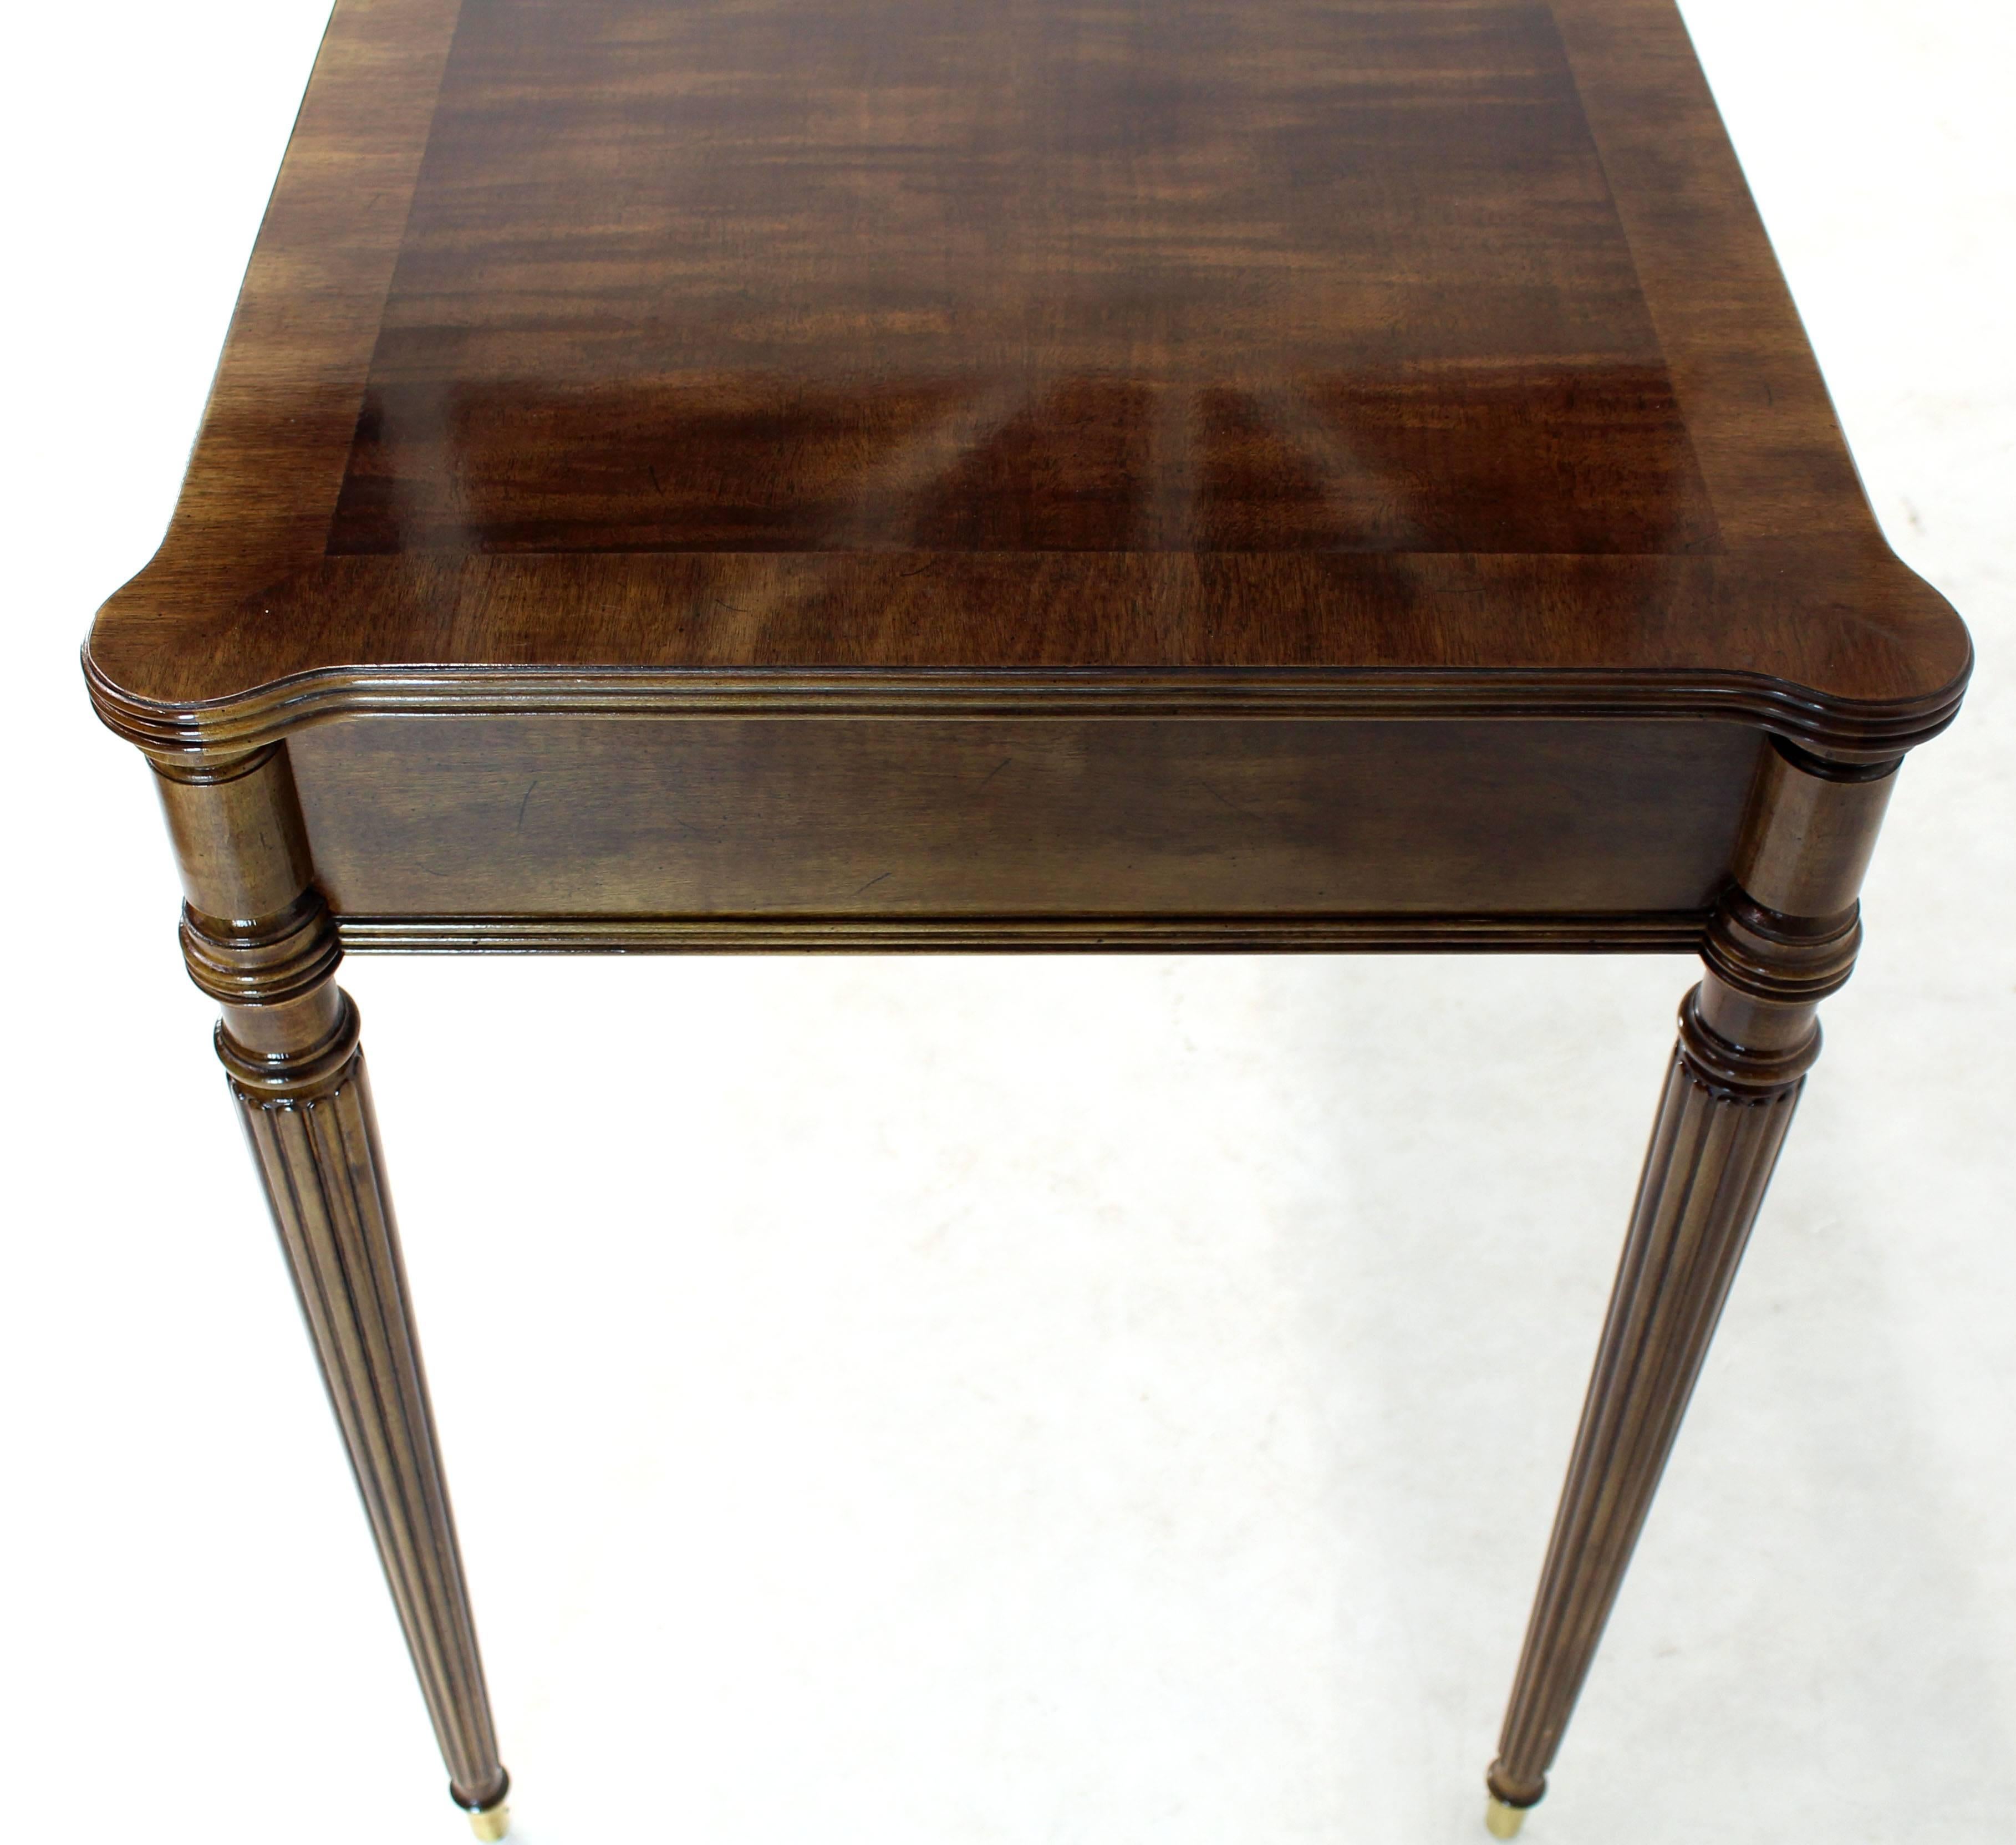 Regency Revival Henredon Writing Hall Console Table with Three Drawers on Fluted Legs Brass